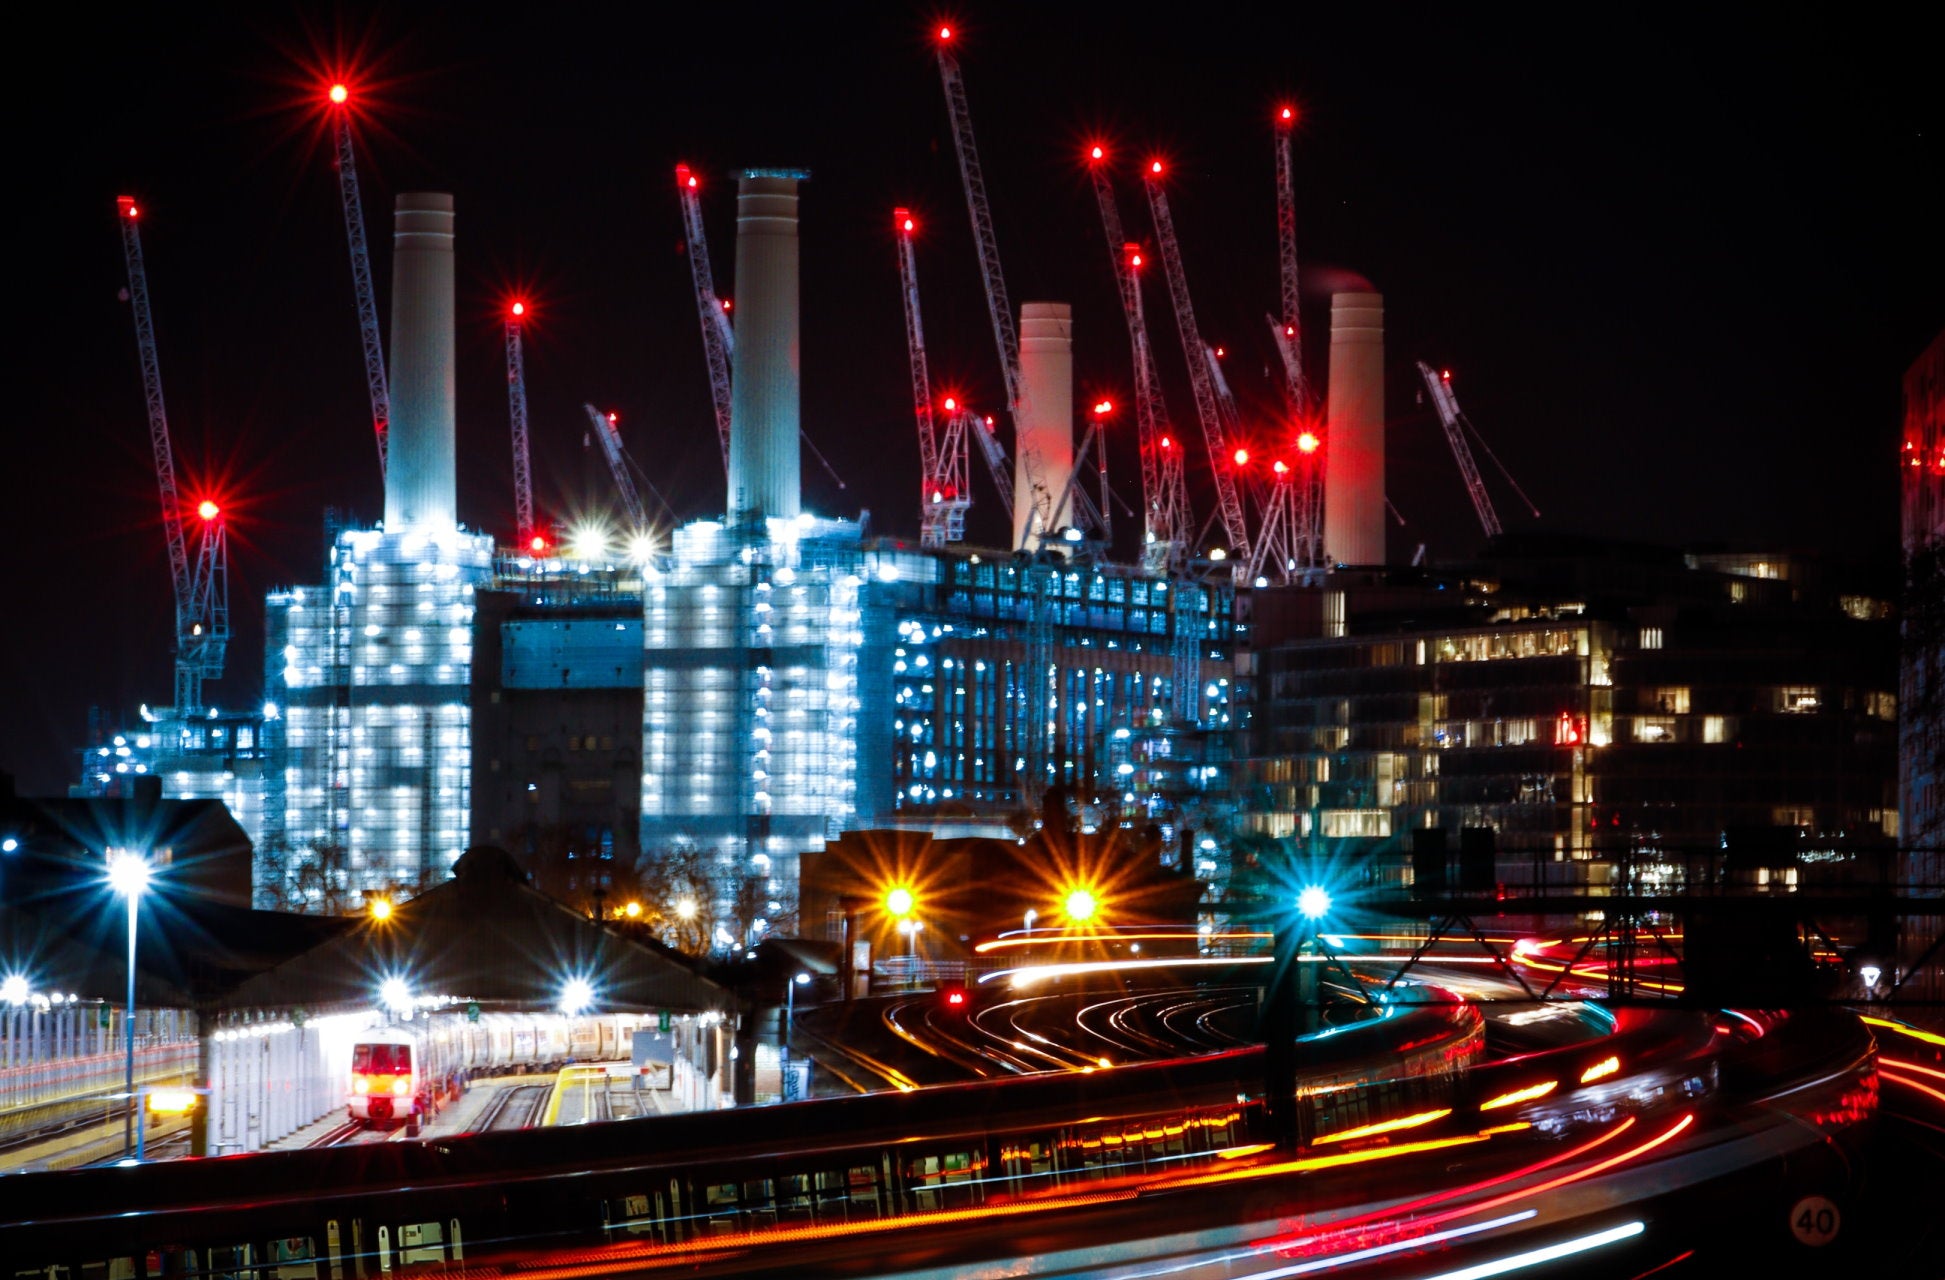 Battersea Power Station Then, Now & The Future